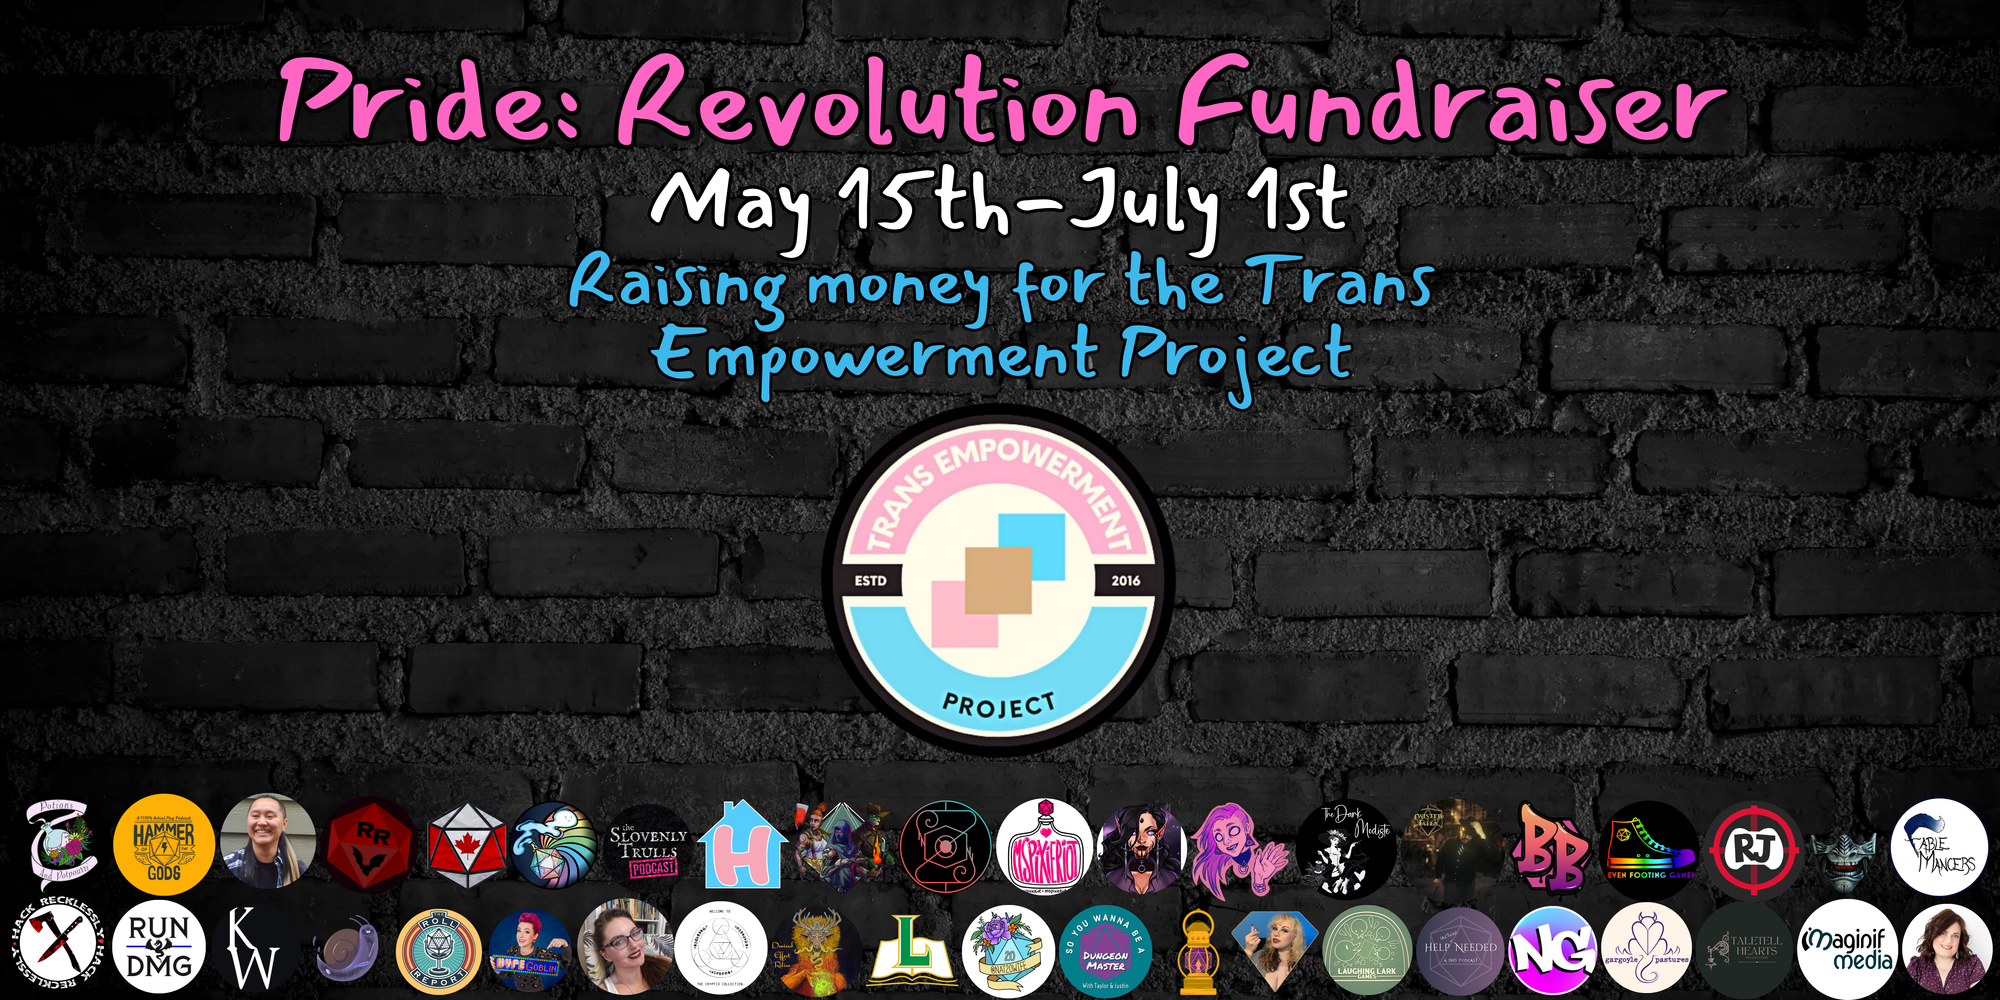 Streamers come together to raise emergency funds for the Trans Empowerment Project